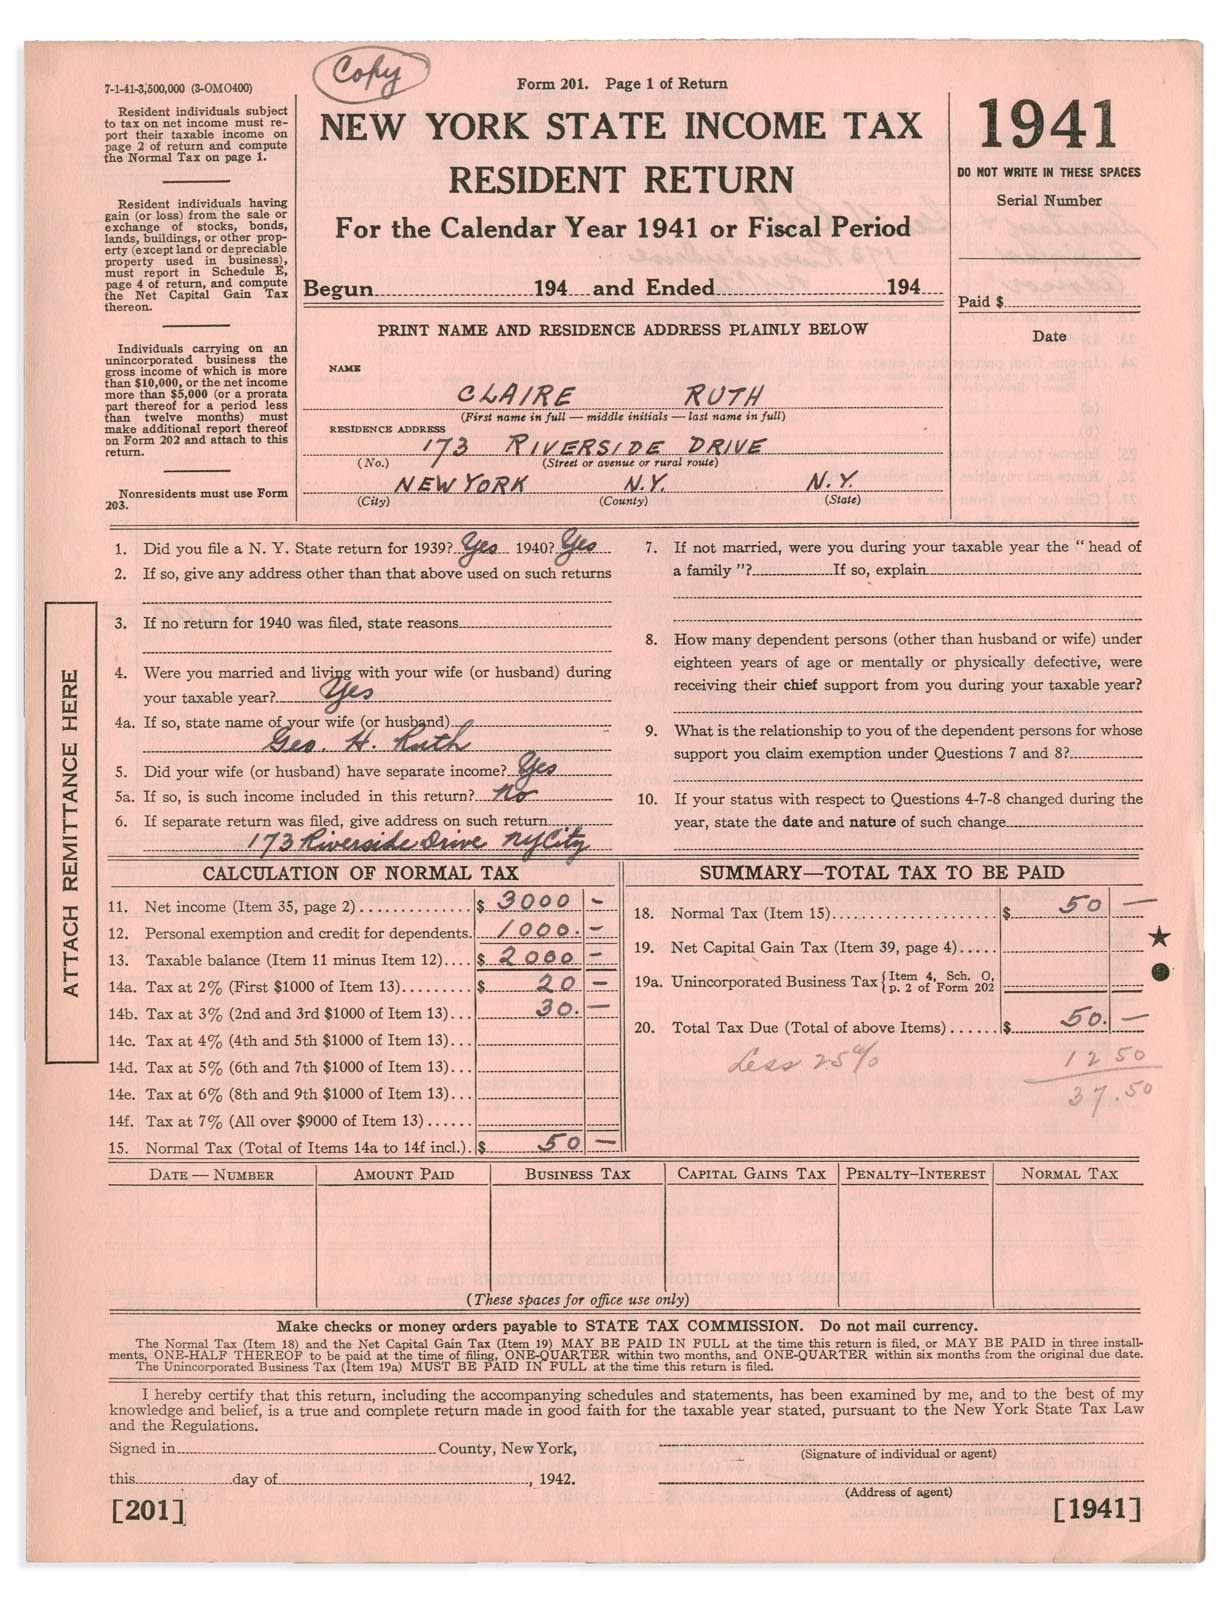 1939-41 Claire Ruth N.Y. State Income Tax Returns (3)